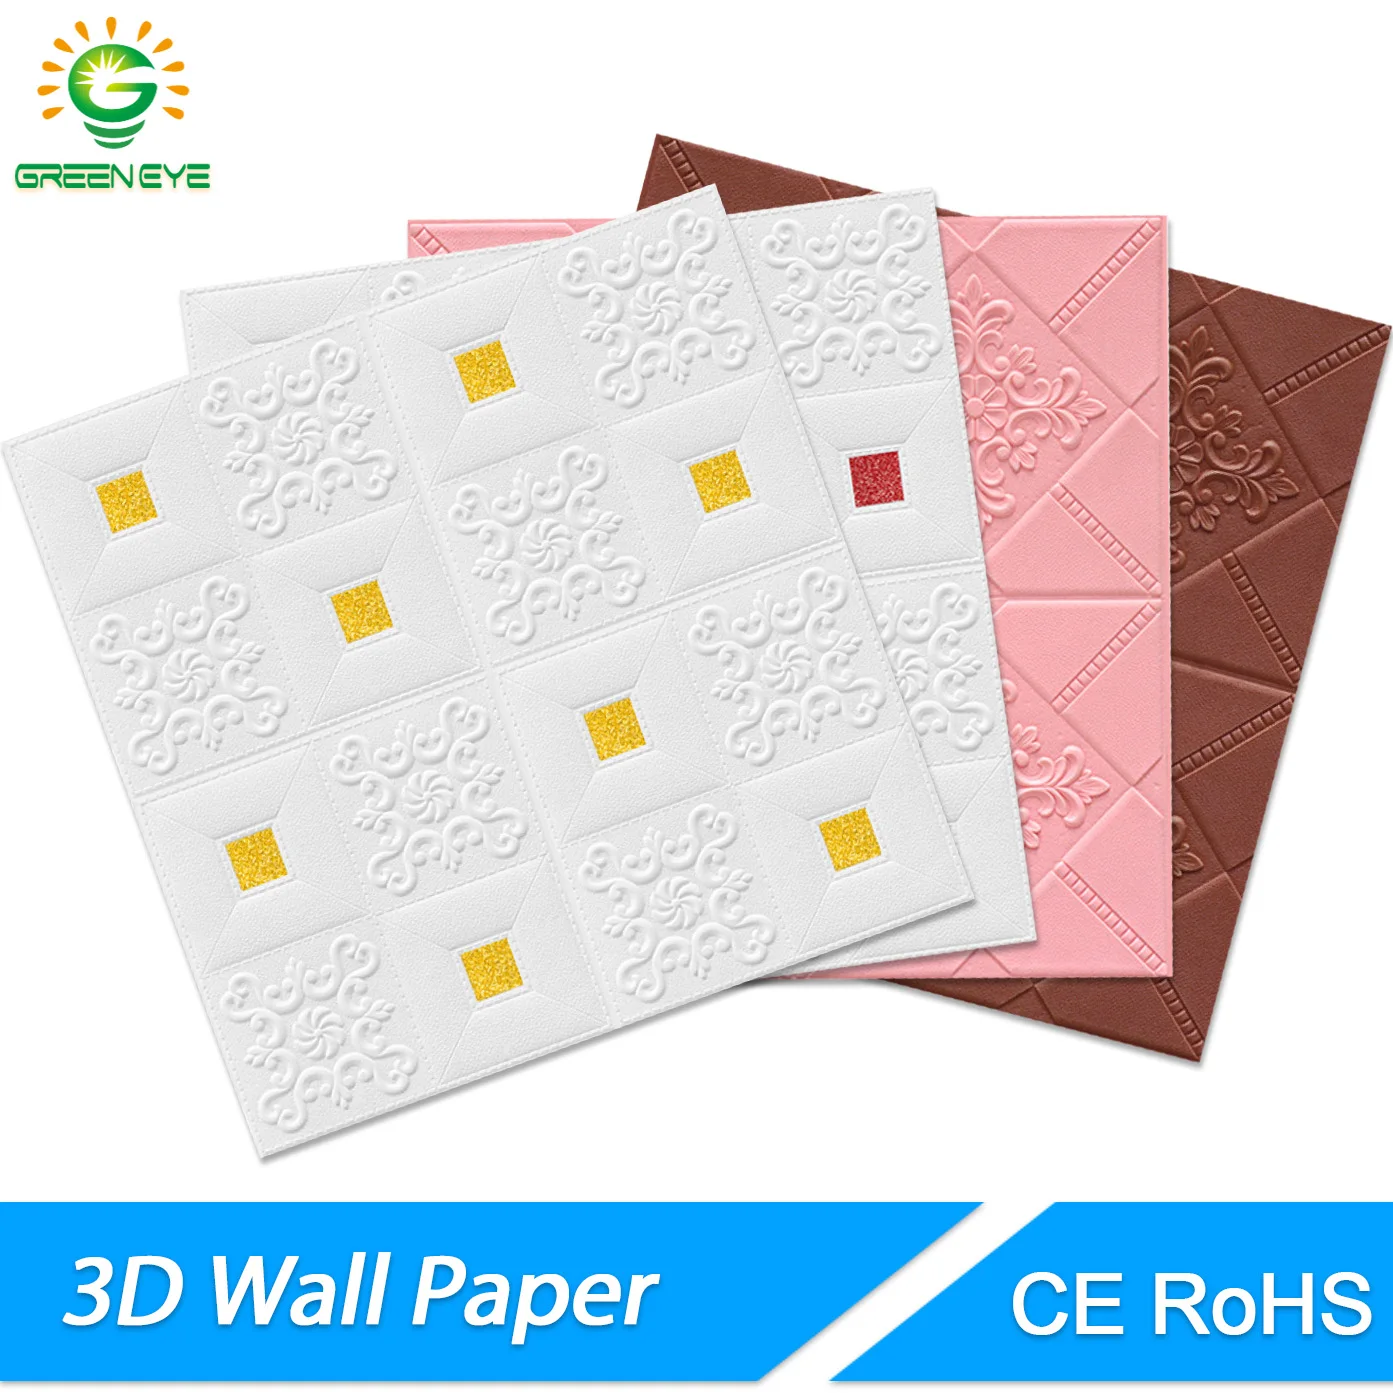 3D Stereo WallStickers Self-adhesive waterproof Ceiling Panels Home Decor Roof Foam Wall paper 70*70cm Living Room TV Background